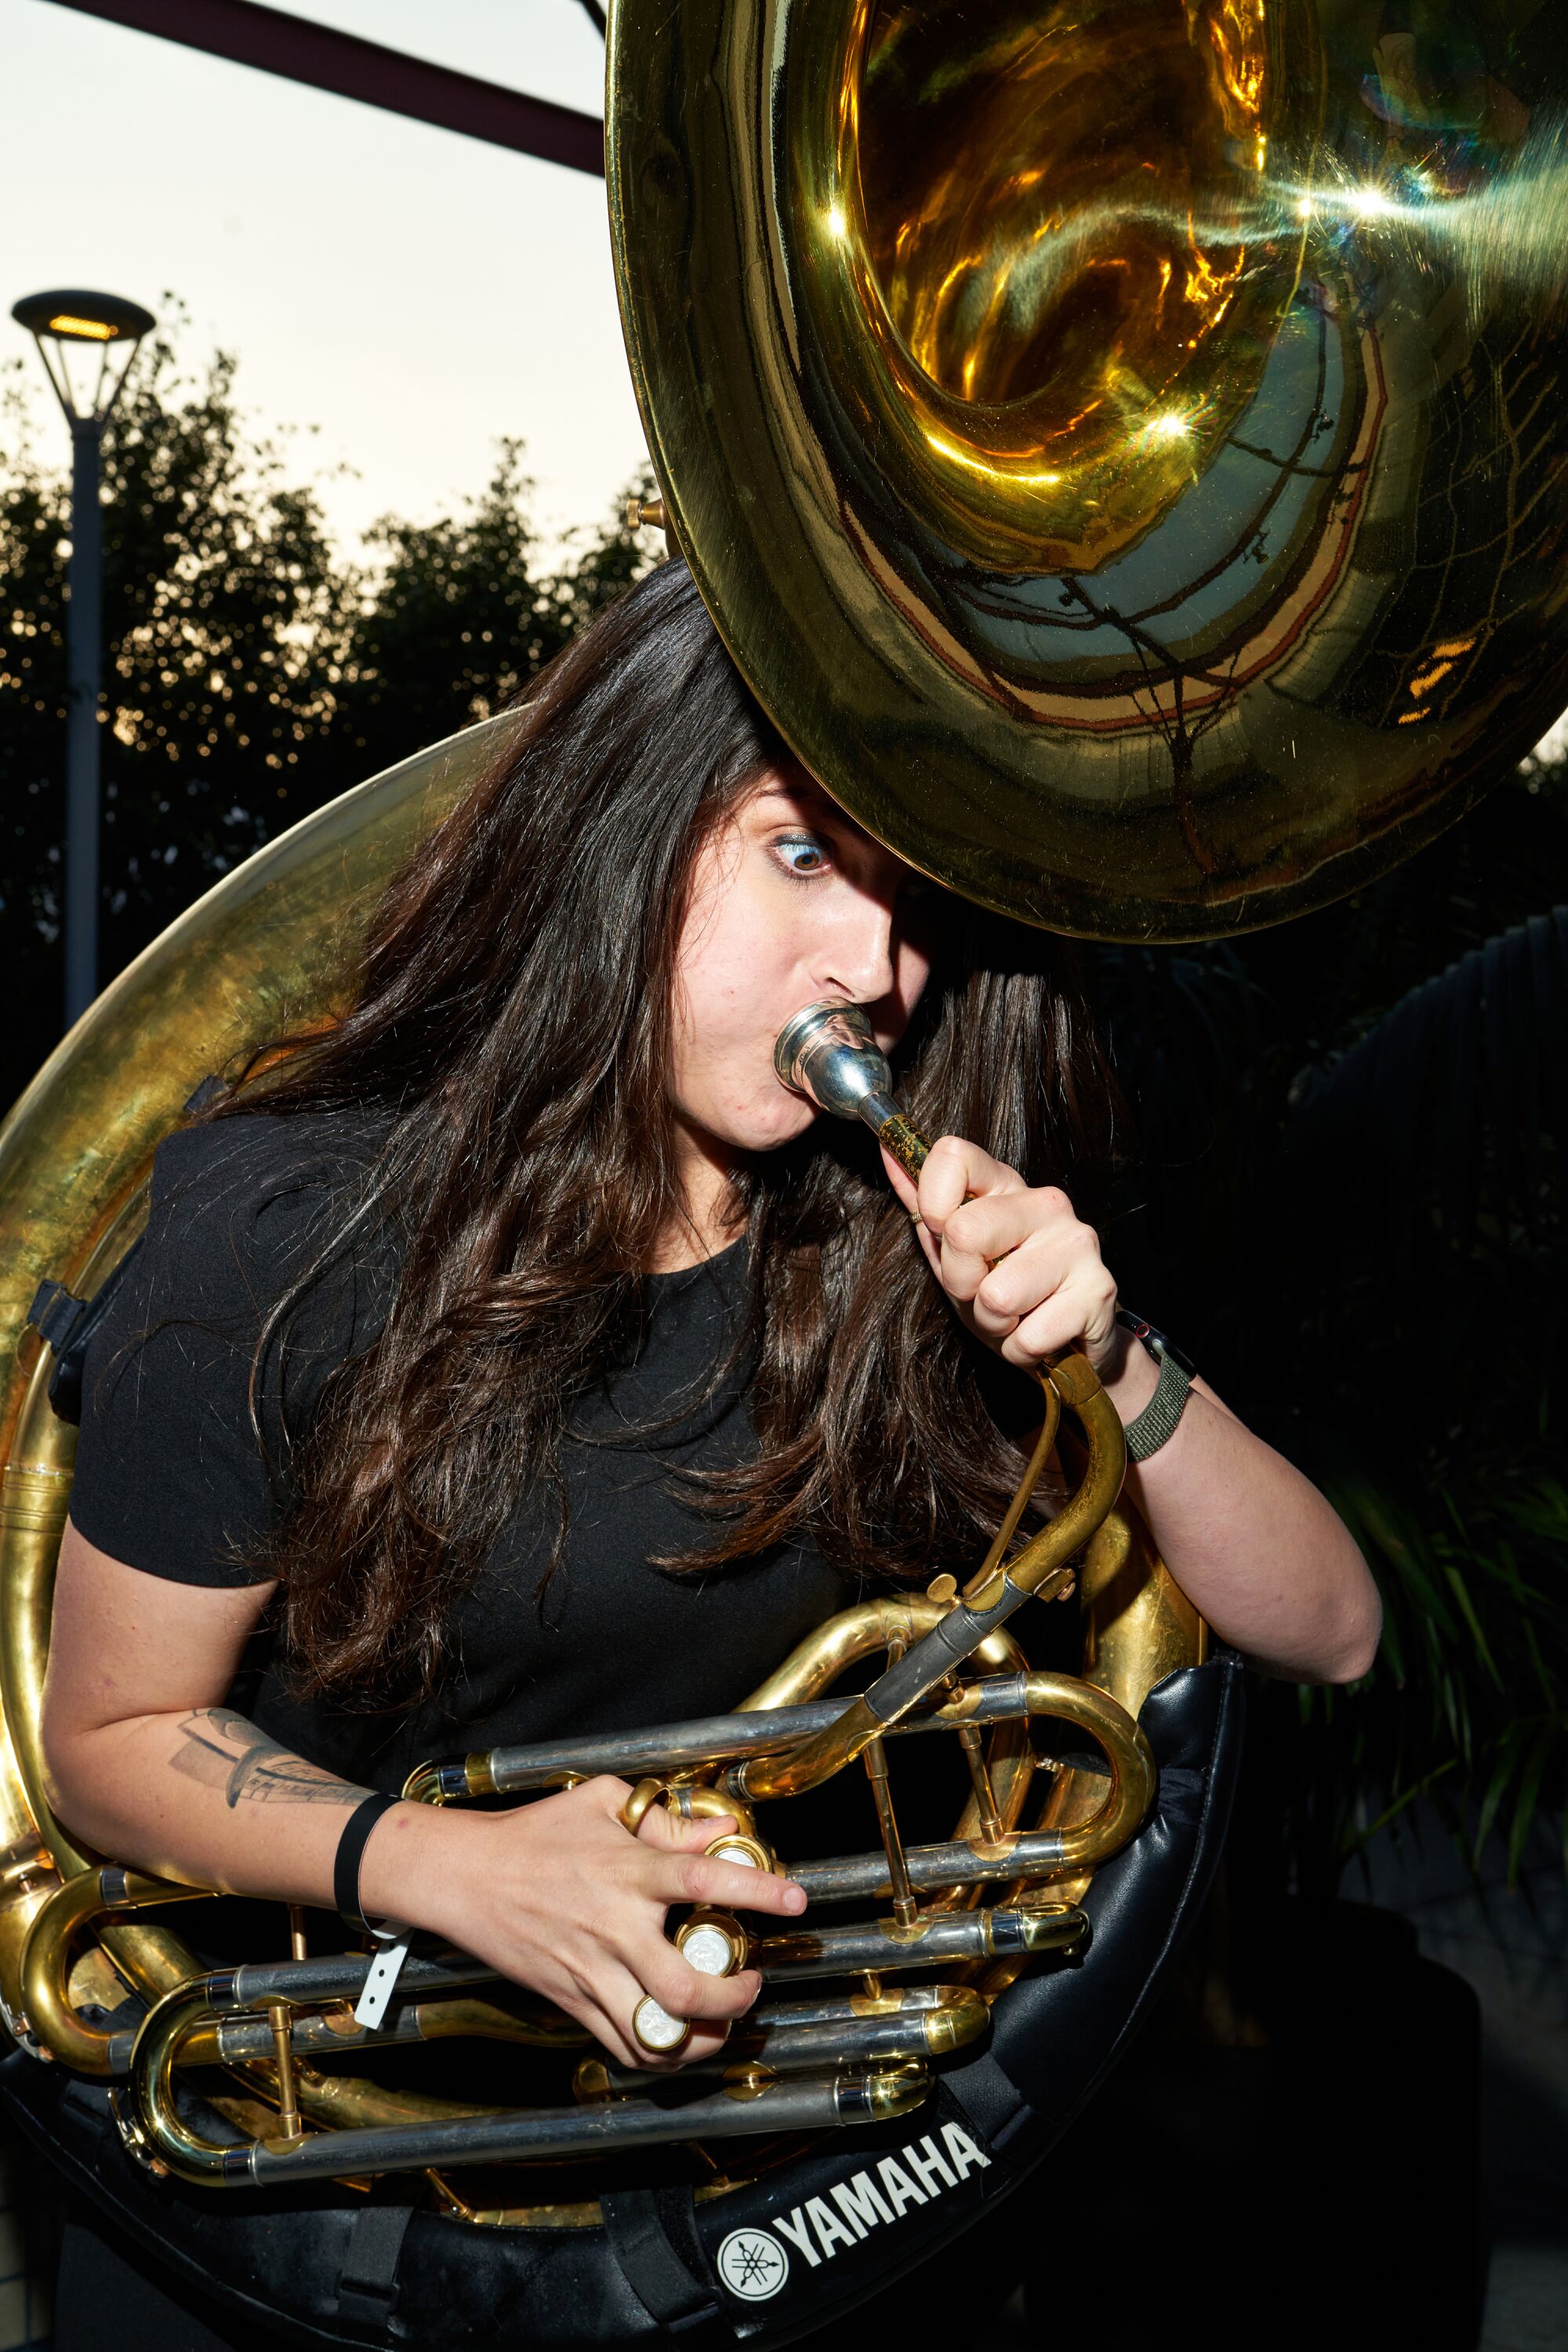 The sounds of a sousaphone, among other brass instruments, rung out and signaled to guests that dinner was about to begin.